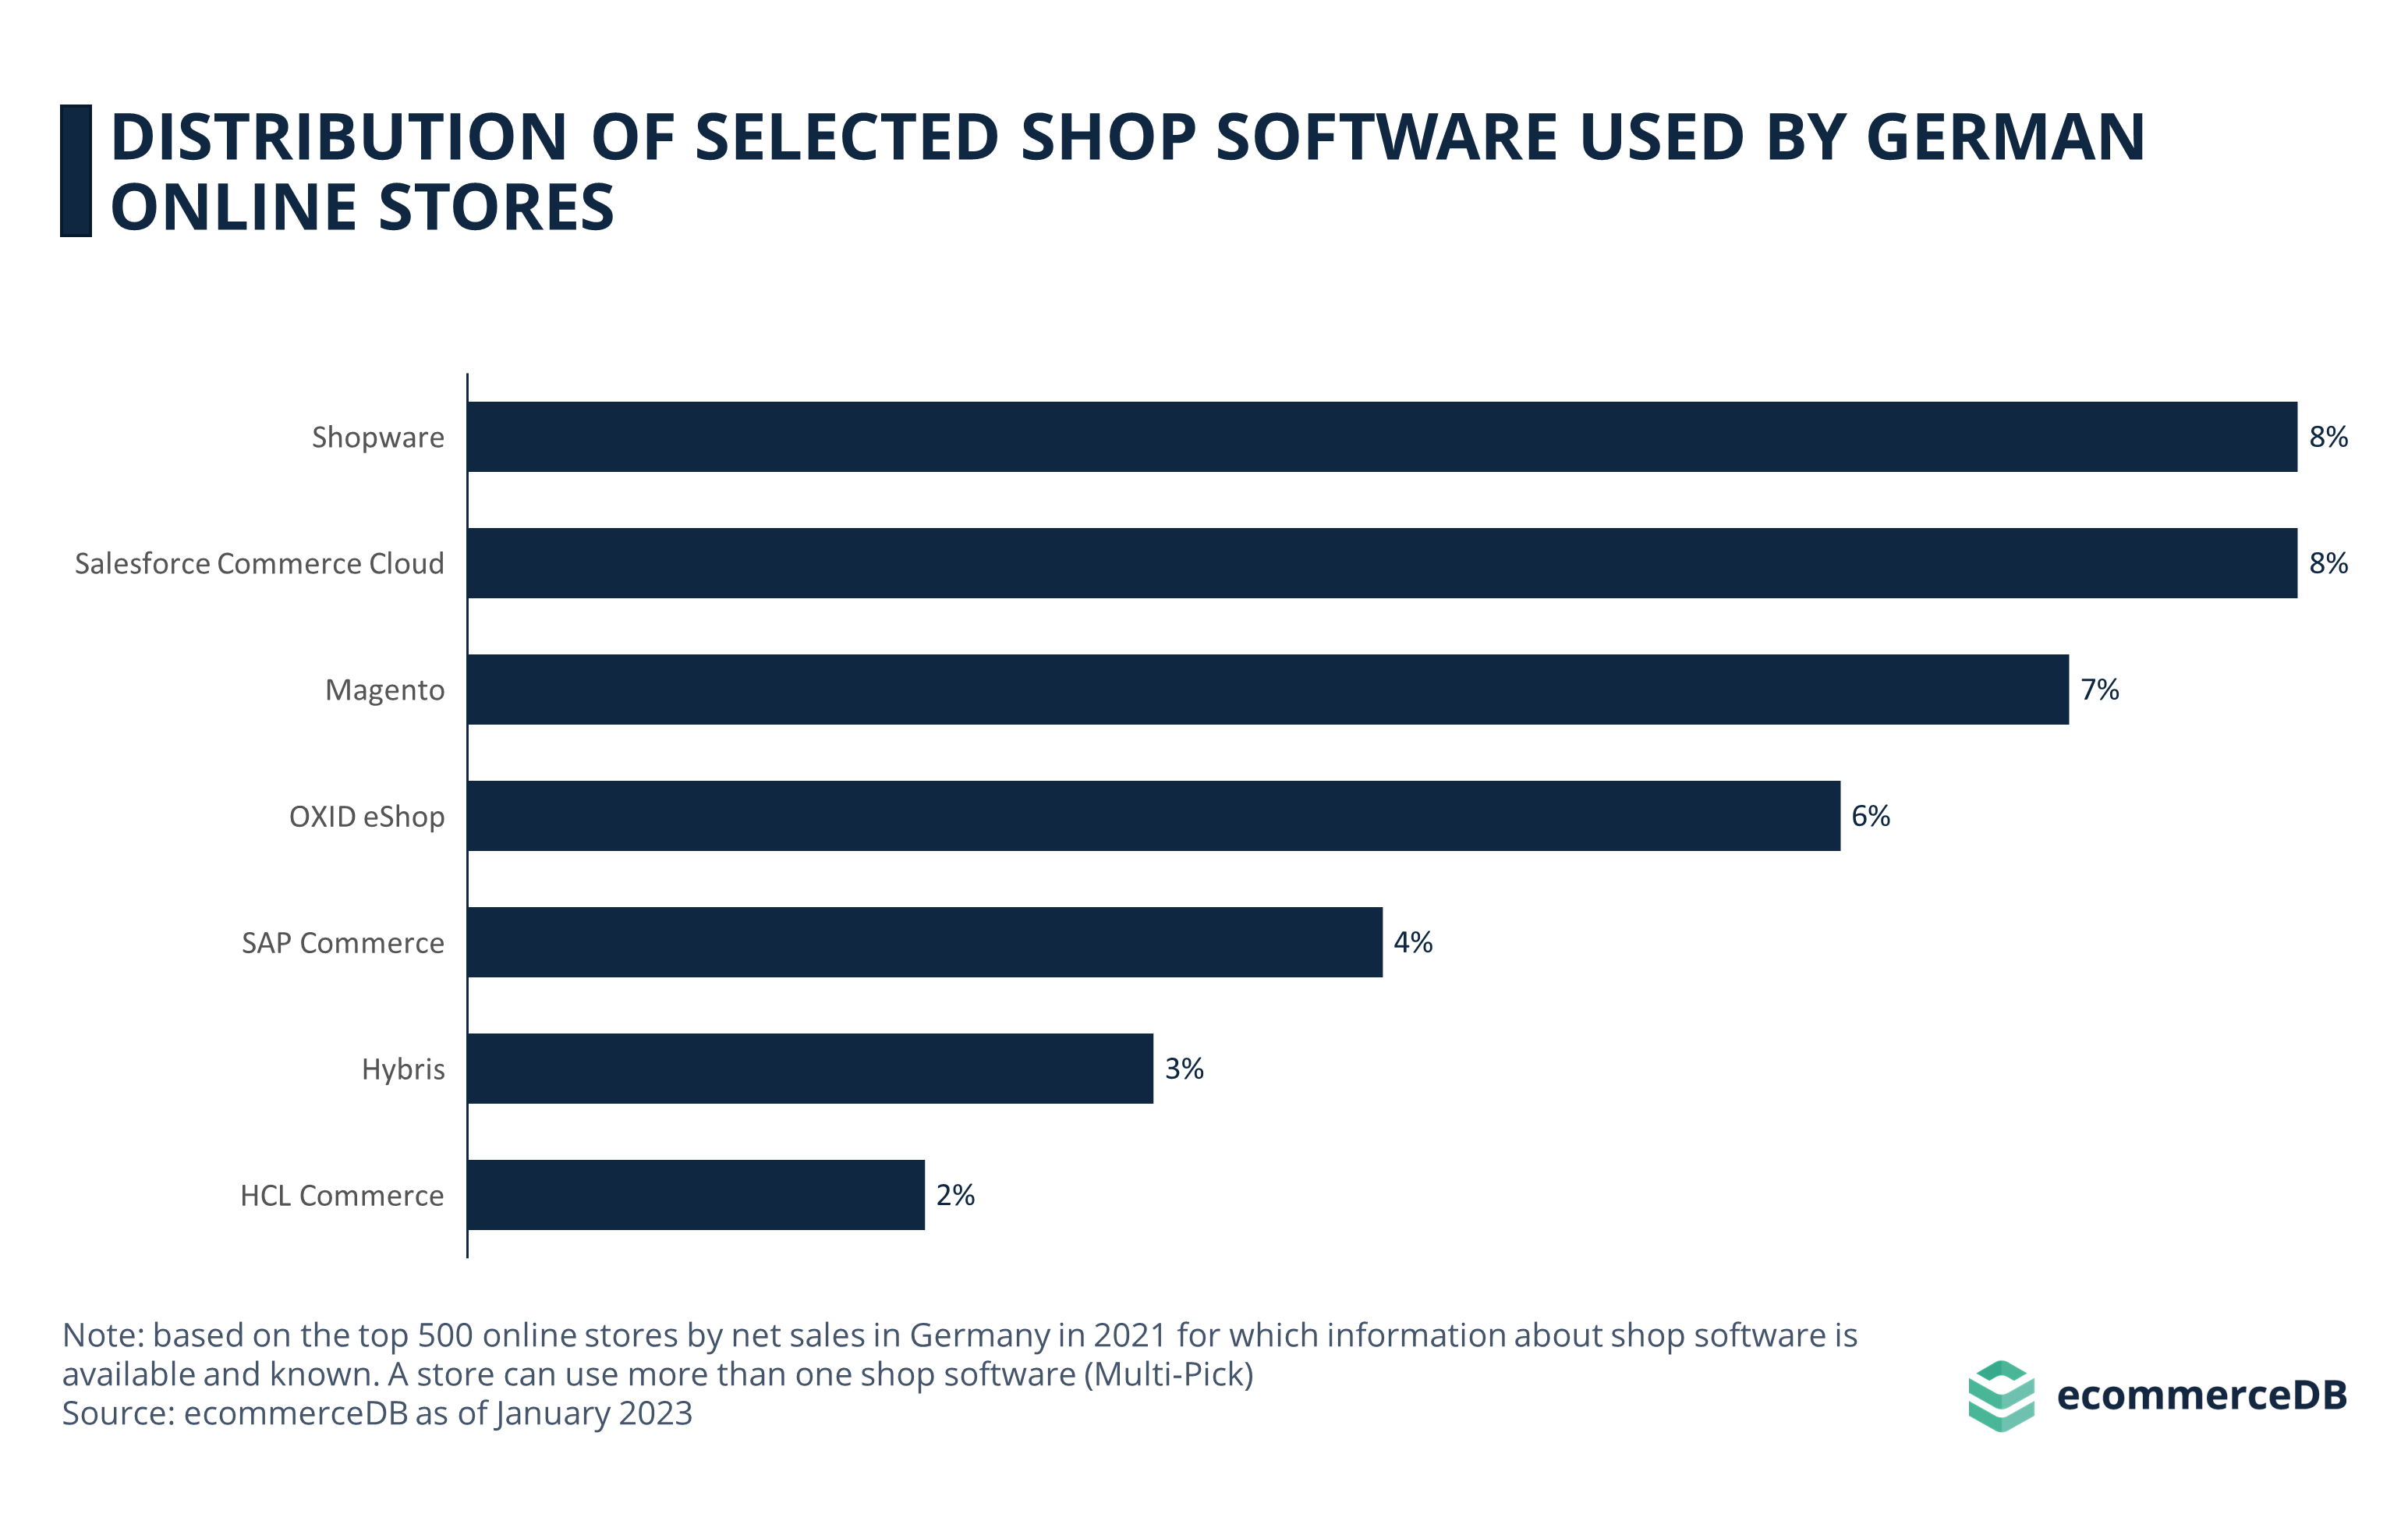 Distribution of Selected Shop Software Used by German Online Stores